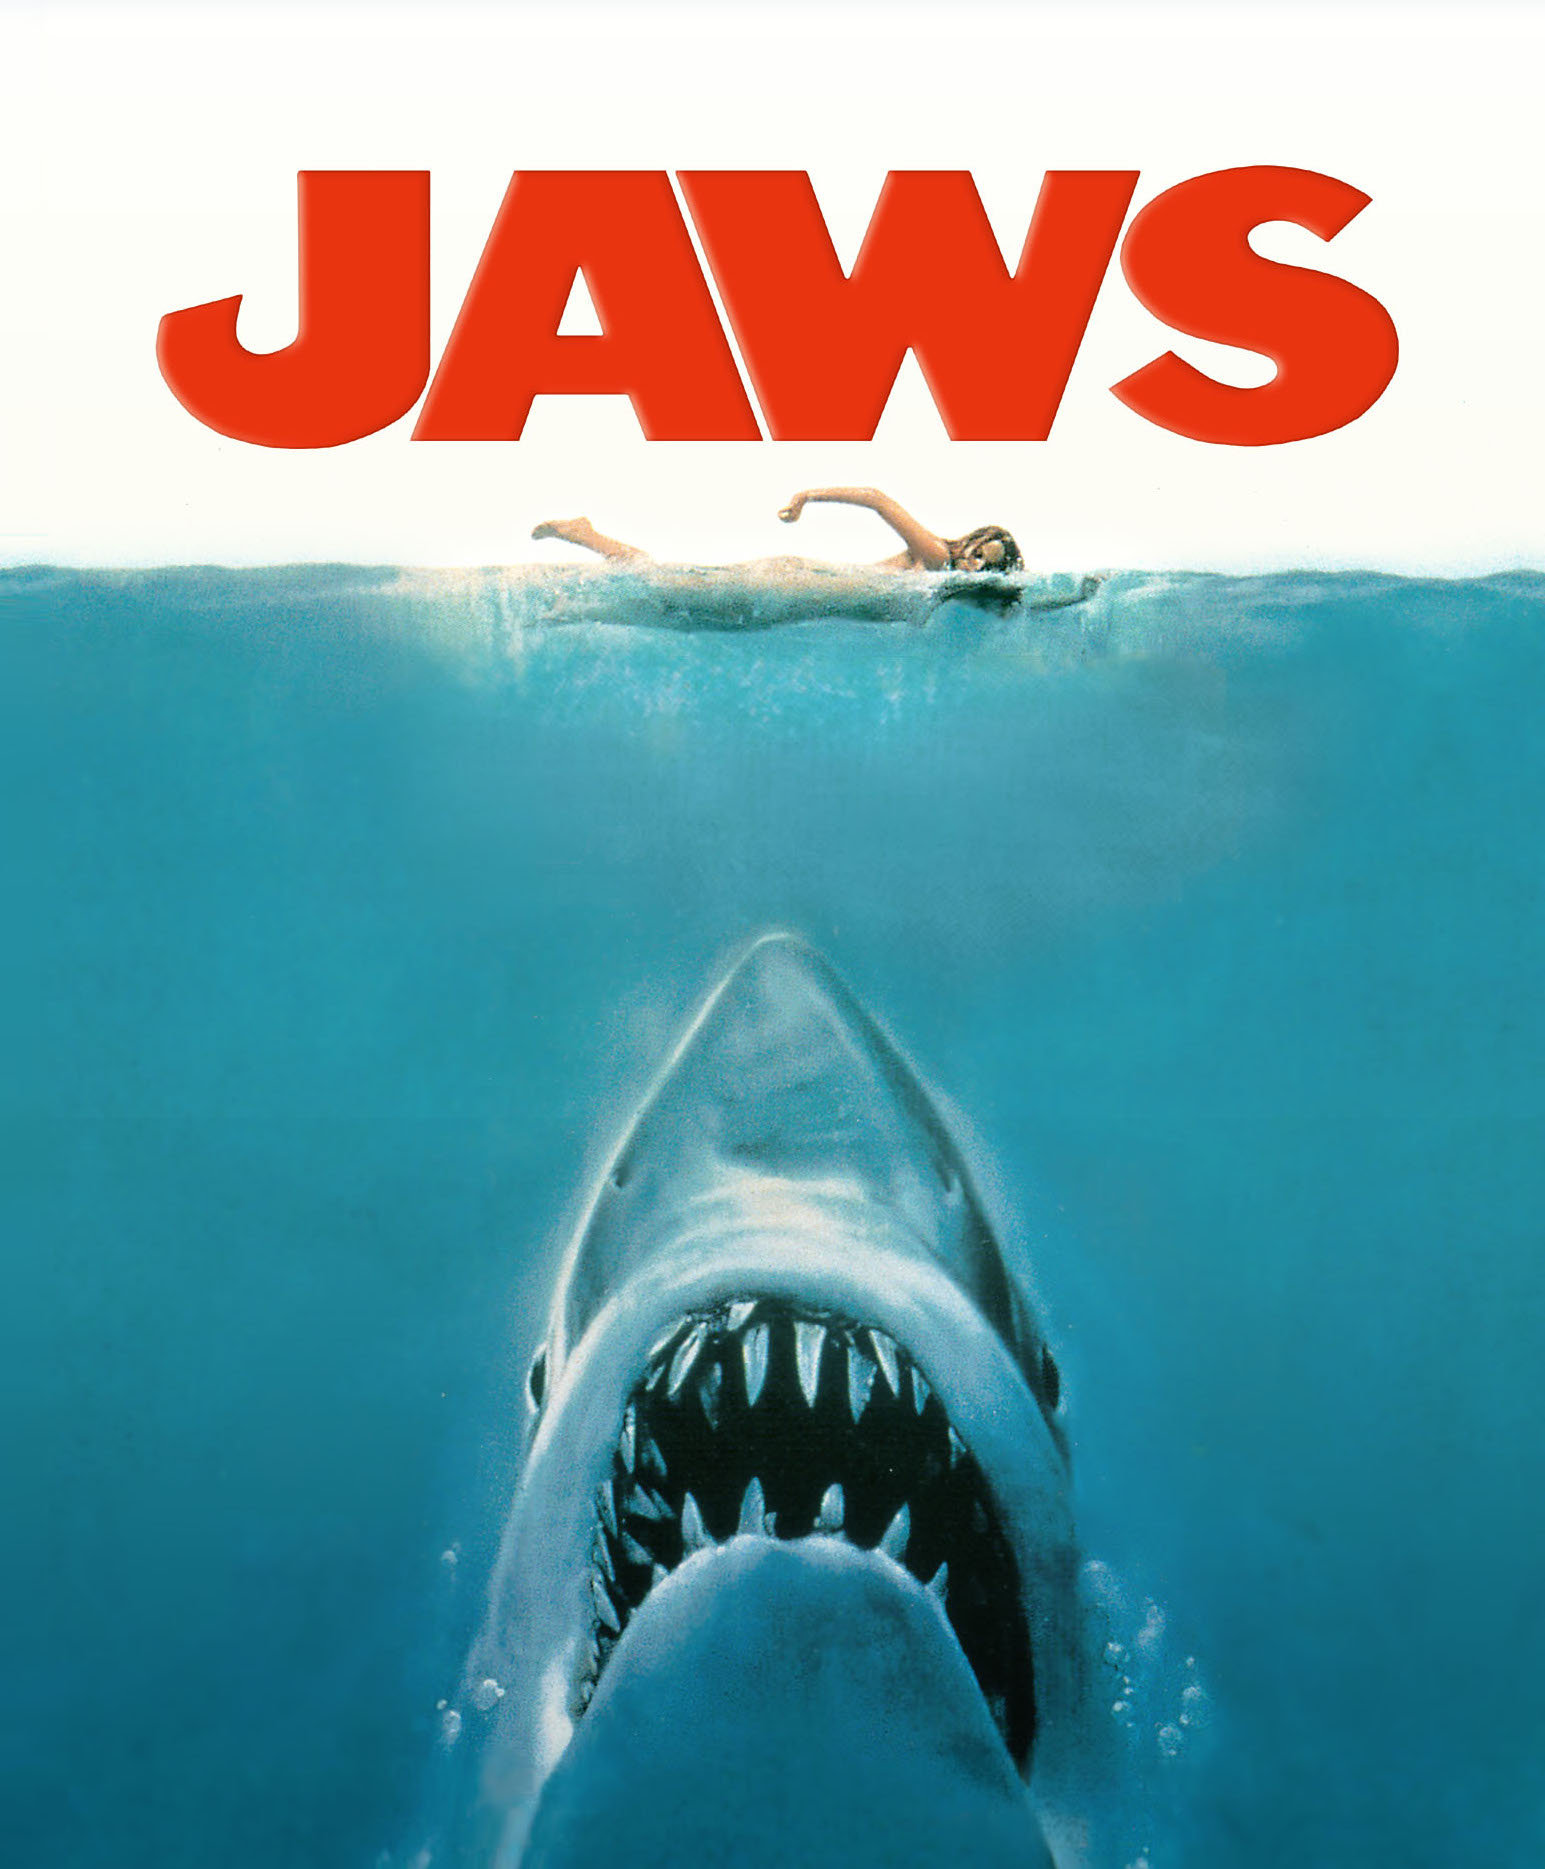 Episode 103 (Jaws)